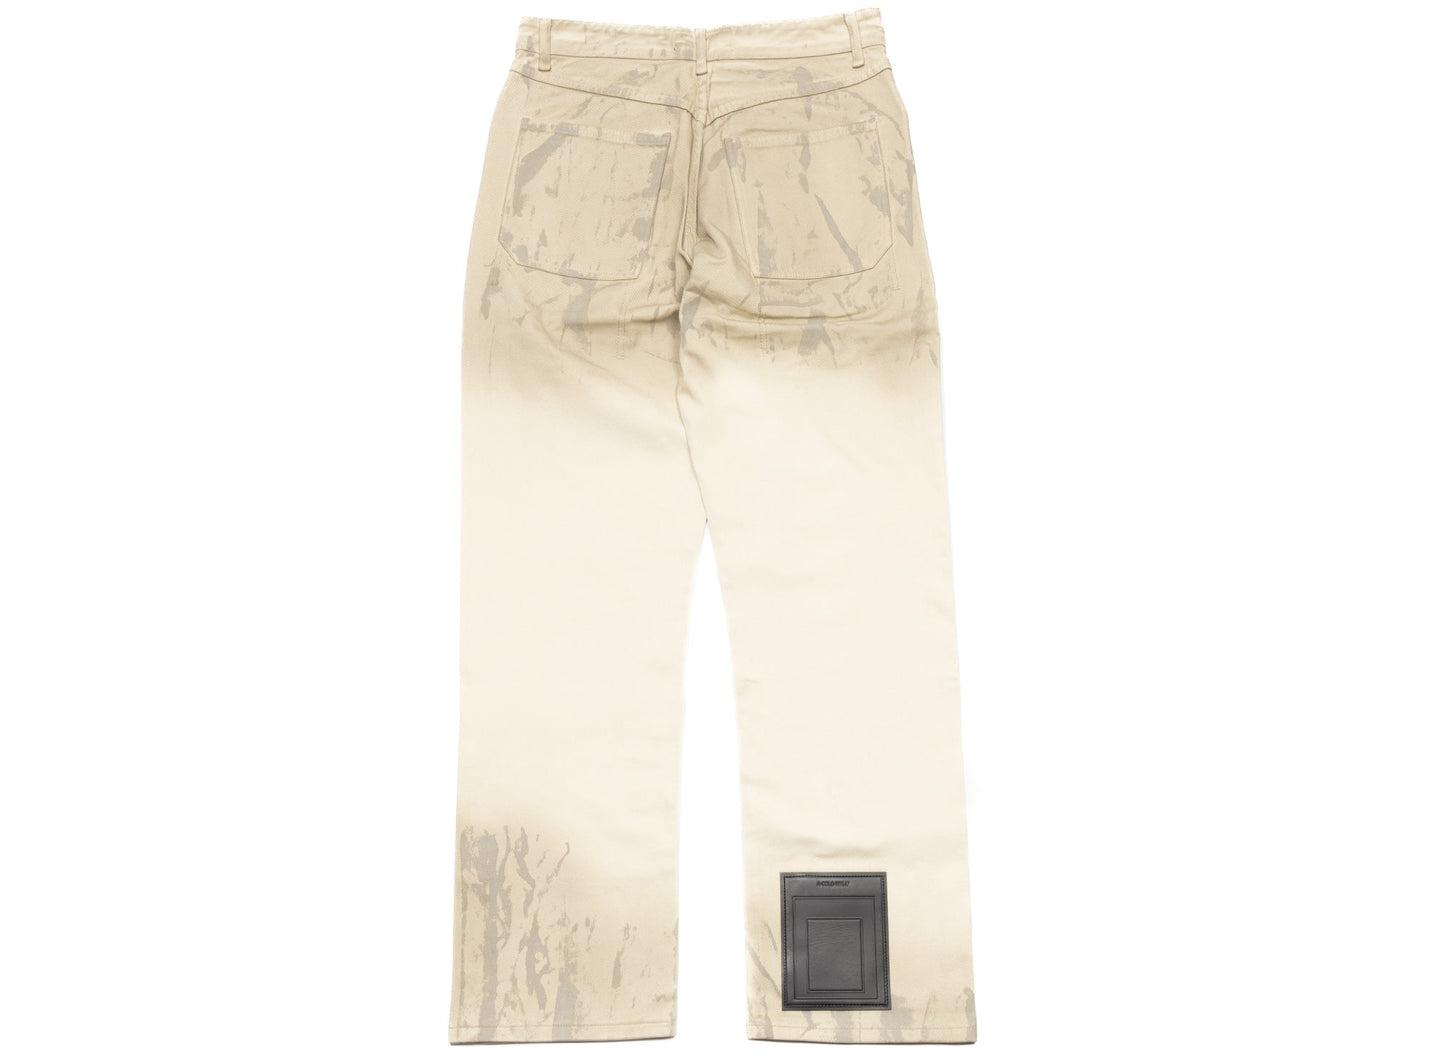 A-COLD-WALL* Corrosion Jeans